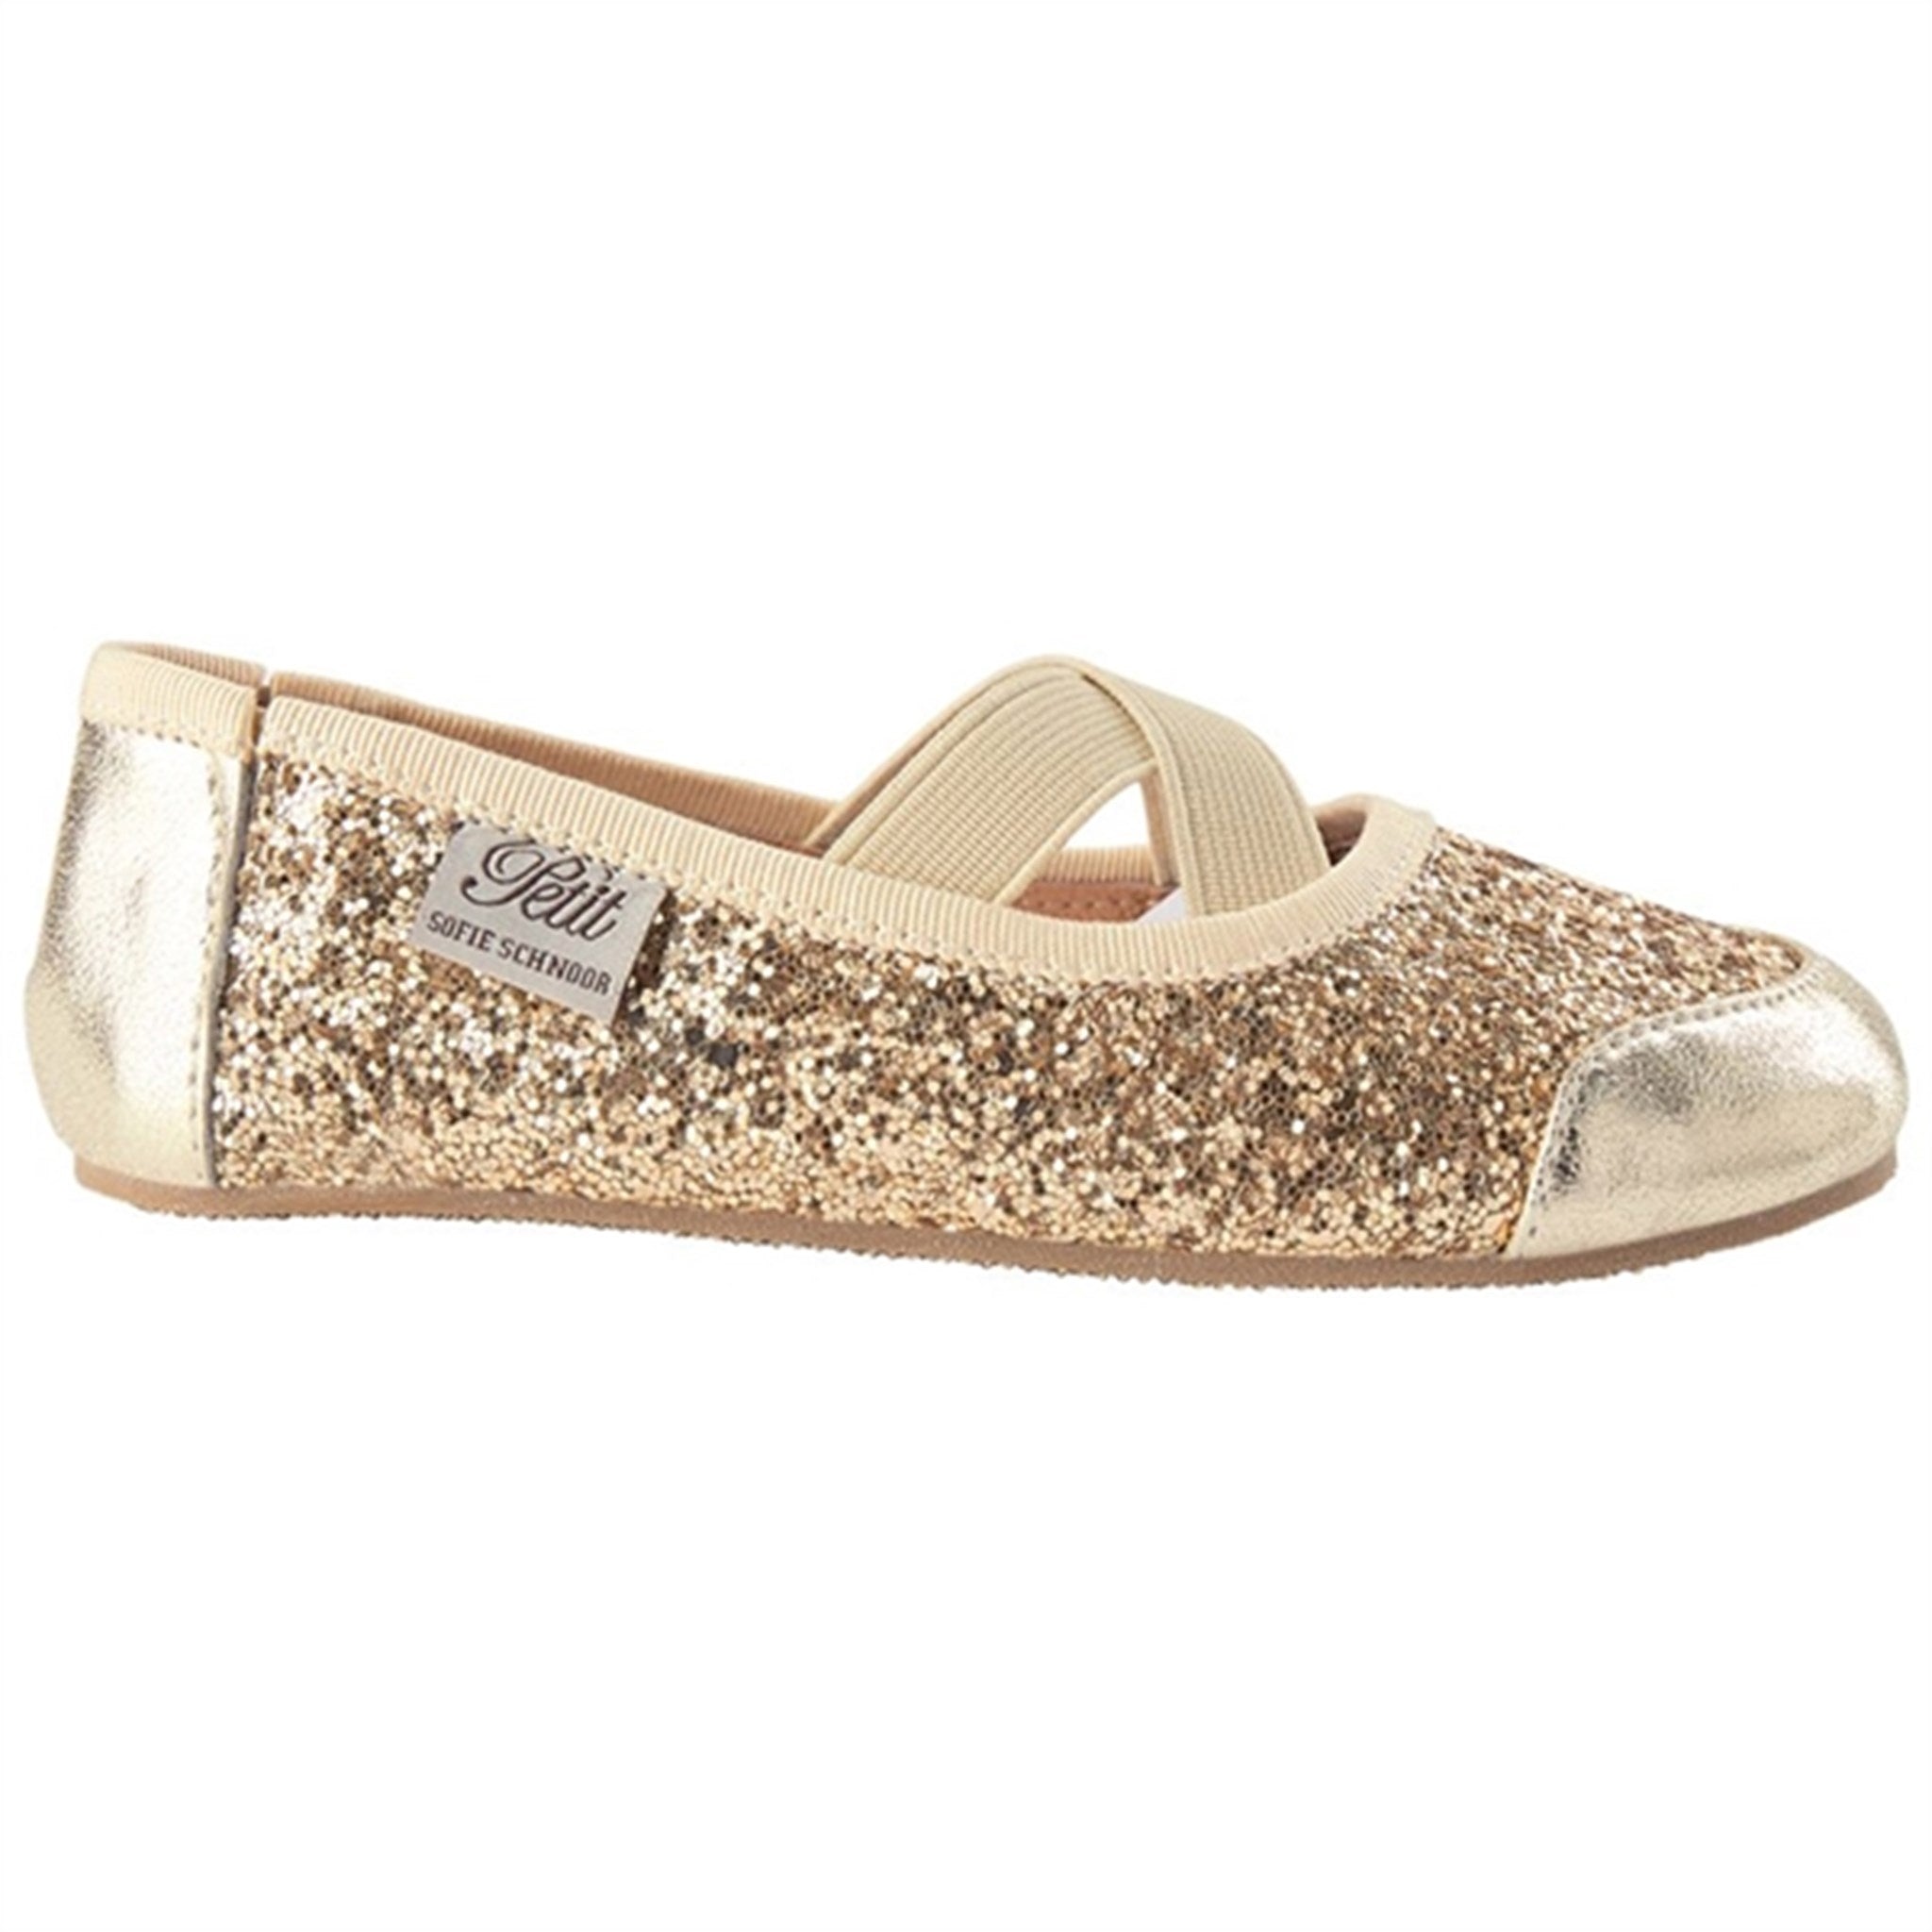 Petit by Sofie Schnoor Ballerina Indoors Shoes Champagne 2